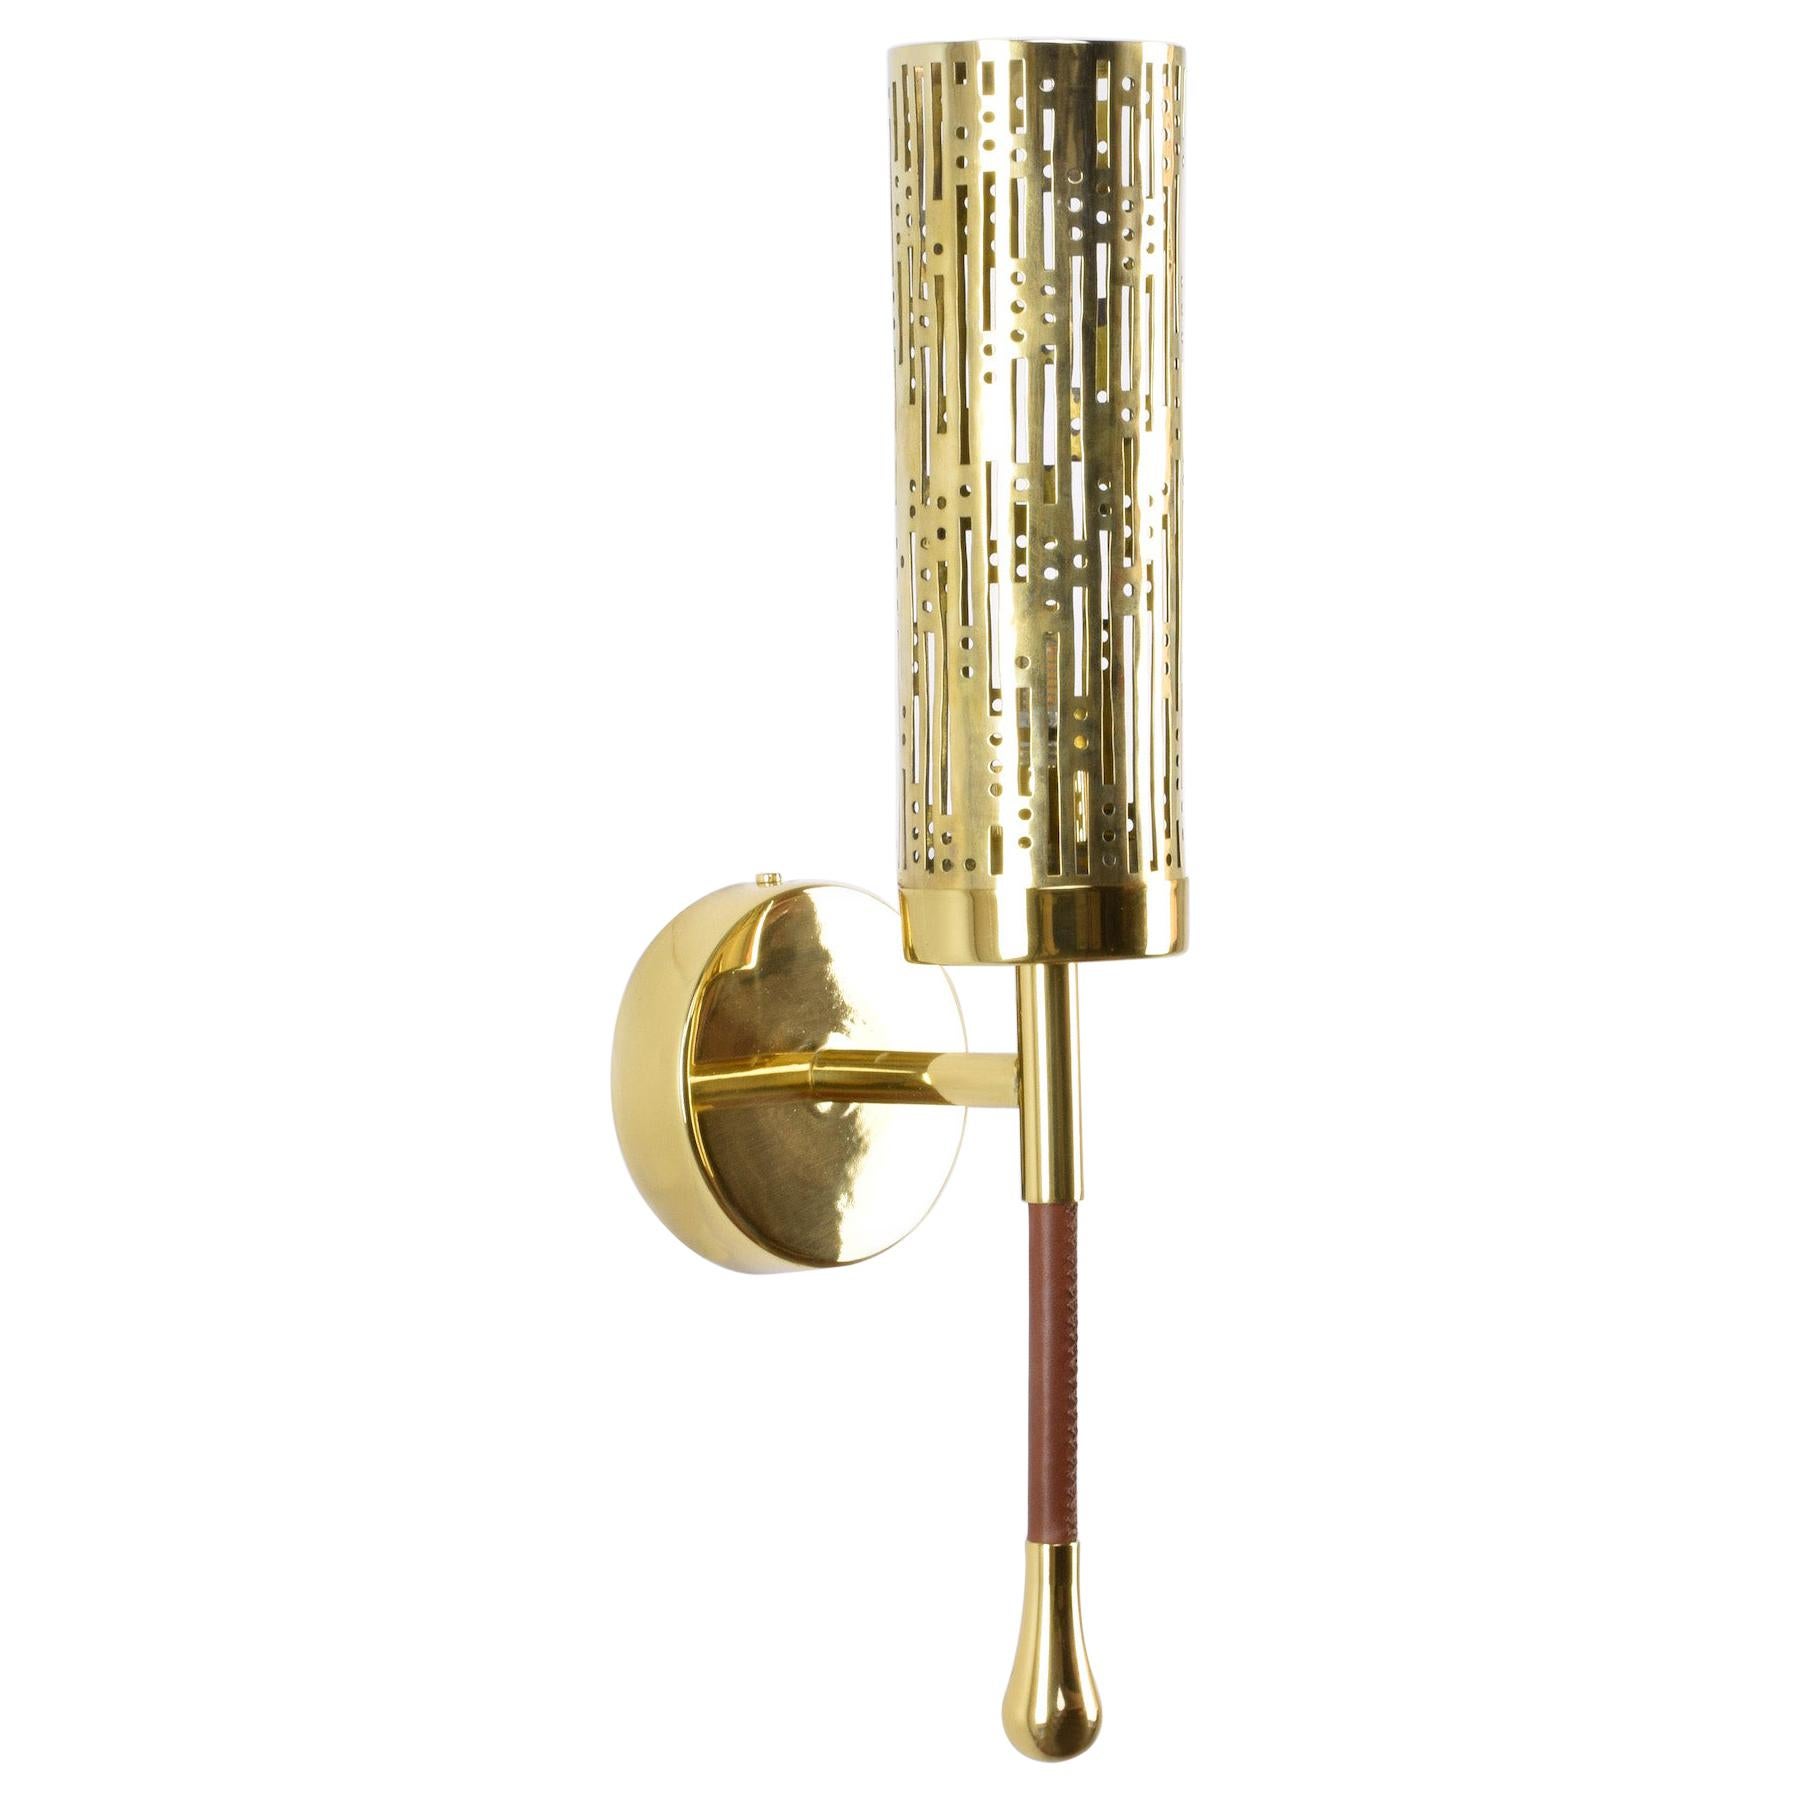 Daya-w1m2 Openwork Brass Wall Light, Flow 2 Collection For Sale